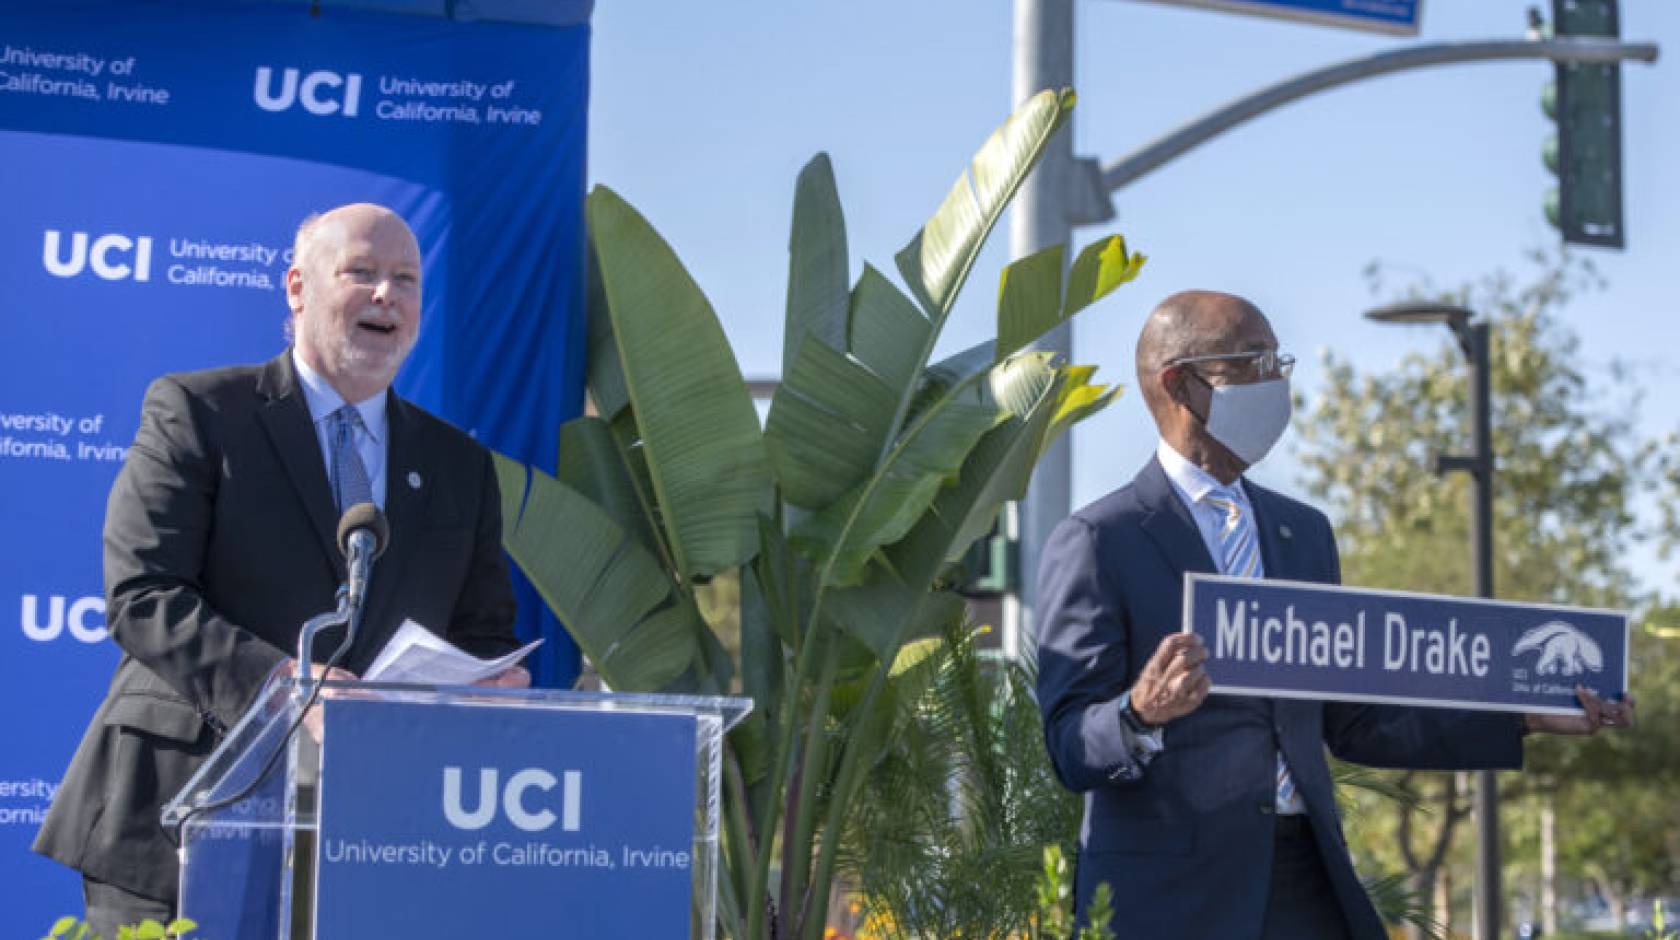 UCI Chancellor Howard Gillman and UC President Michael V. Drake at the June 4 ceremony christening Michael Drake Drive